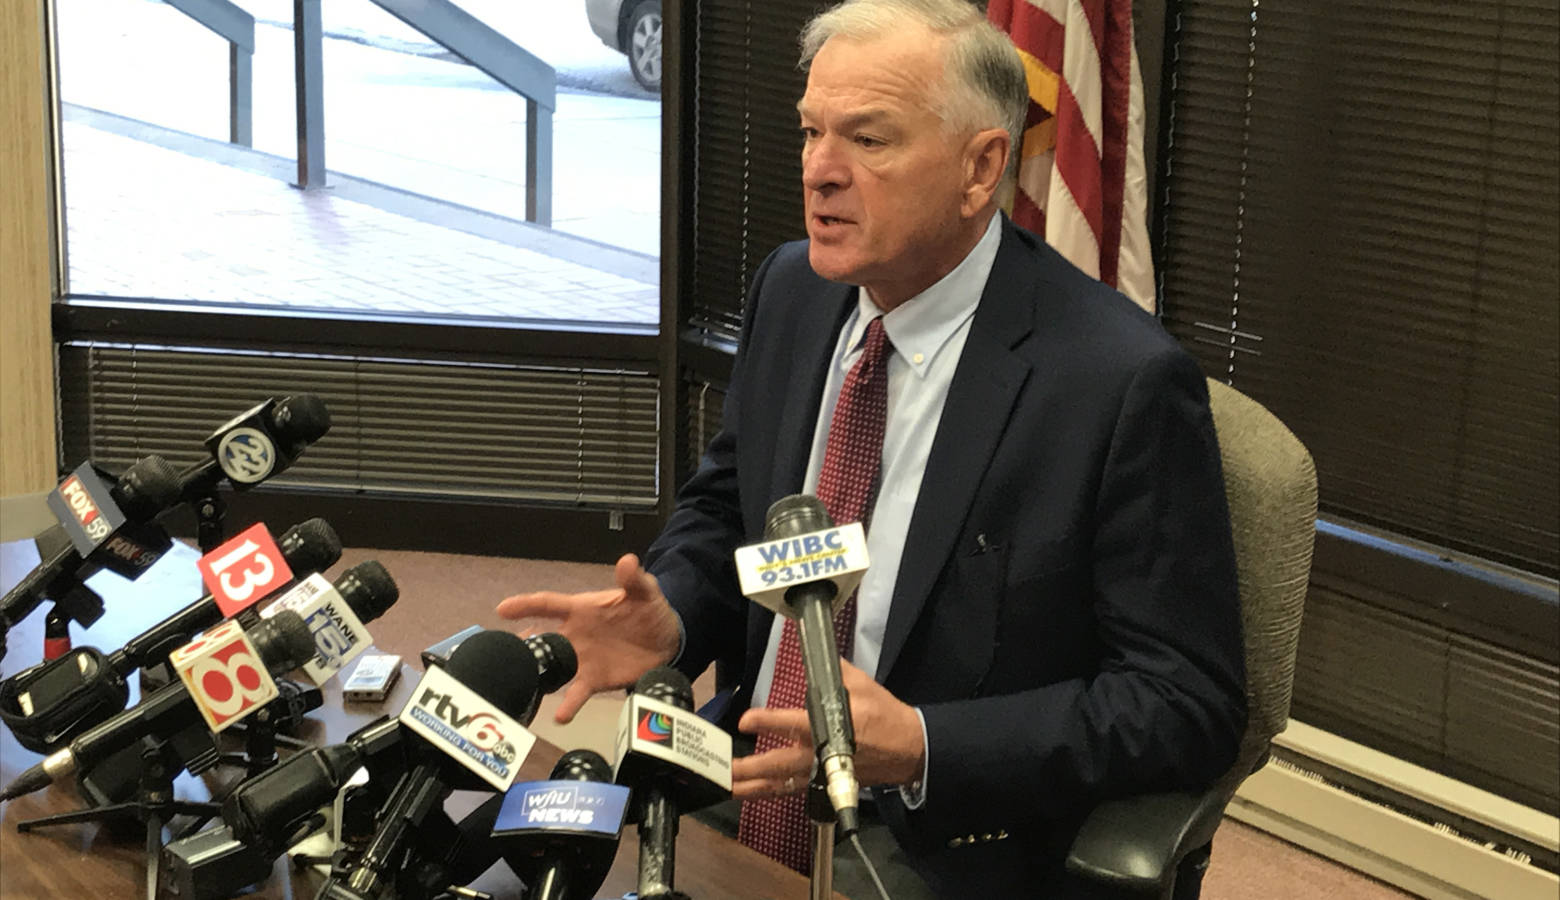 Special prosecutor Dan Sigler discusses his decision not to bring criminal charges against Indiana Attorney General Curtis Hill. (Brandon Smith/IPB News)